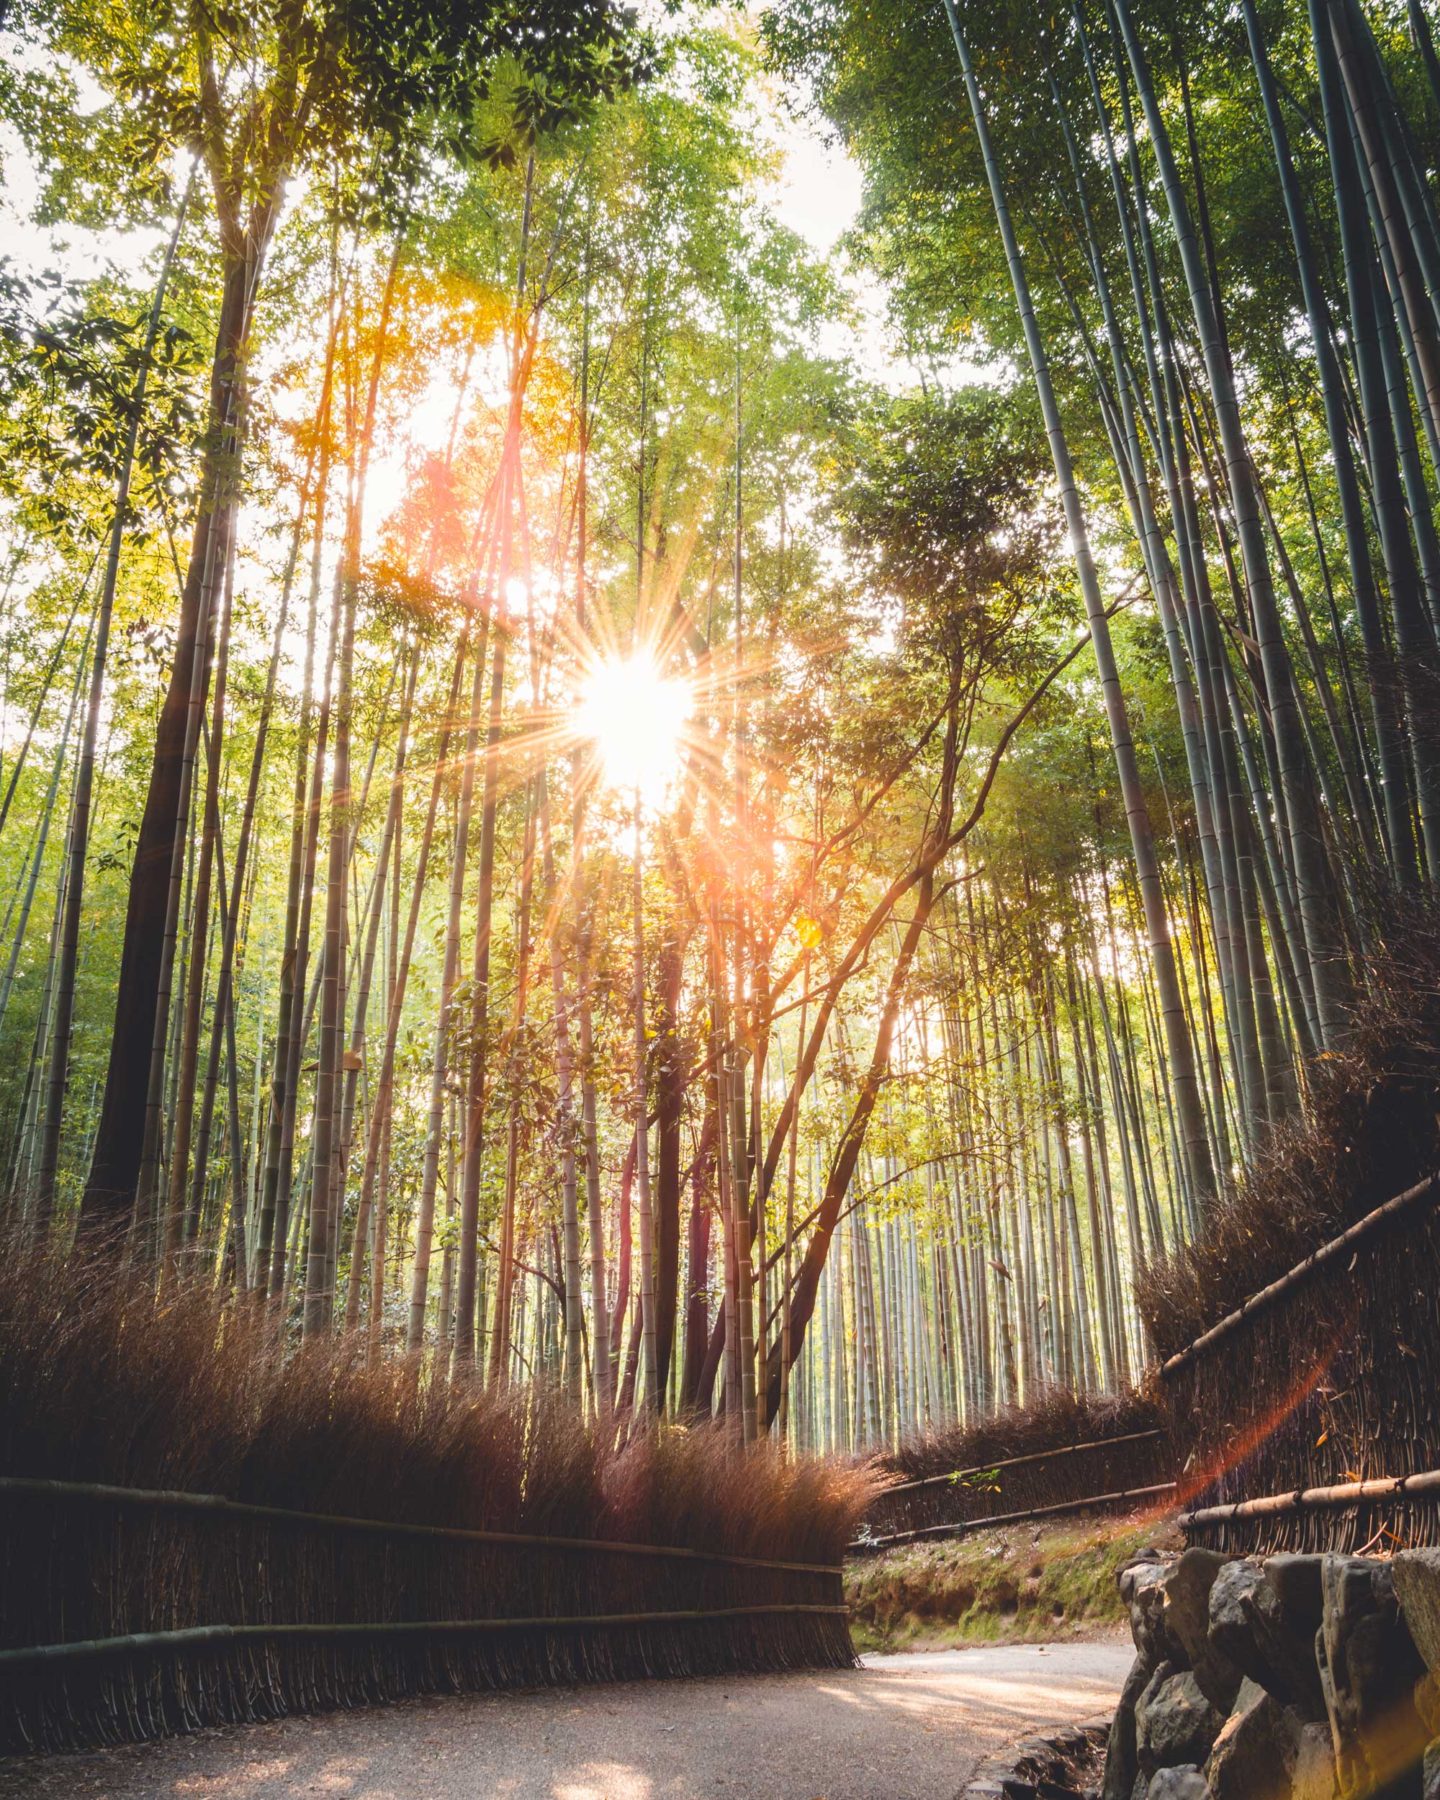 A path through a towering bamboo grove with sunlight filtering through in Japan